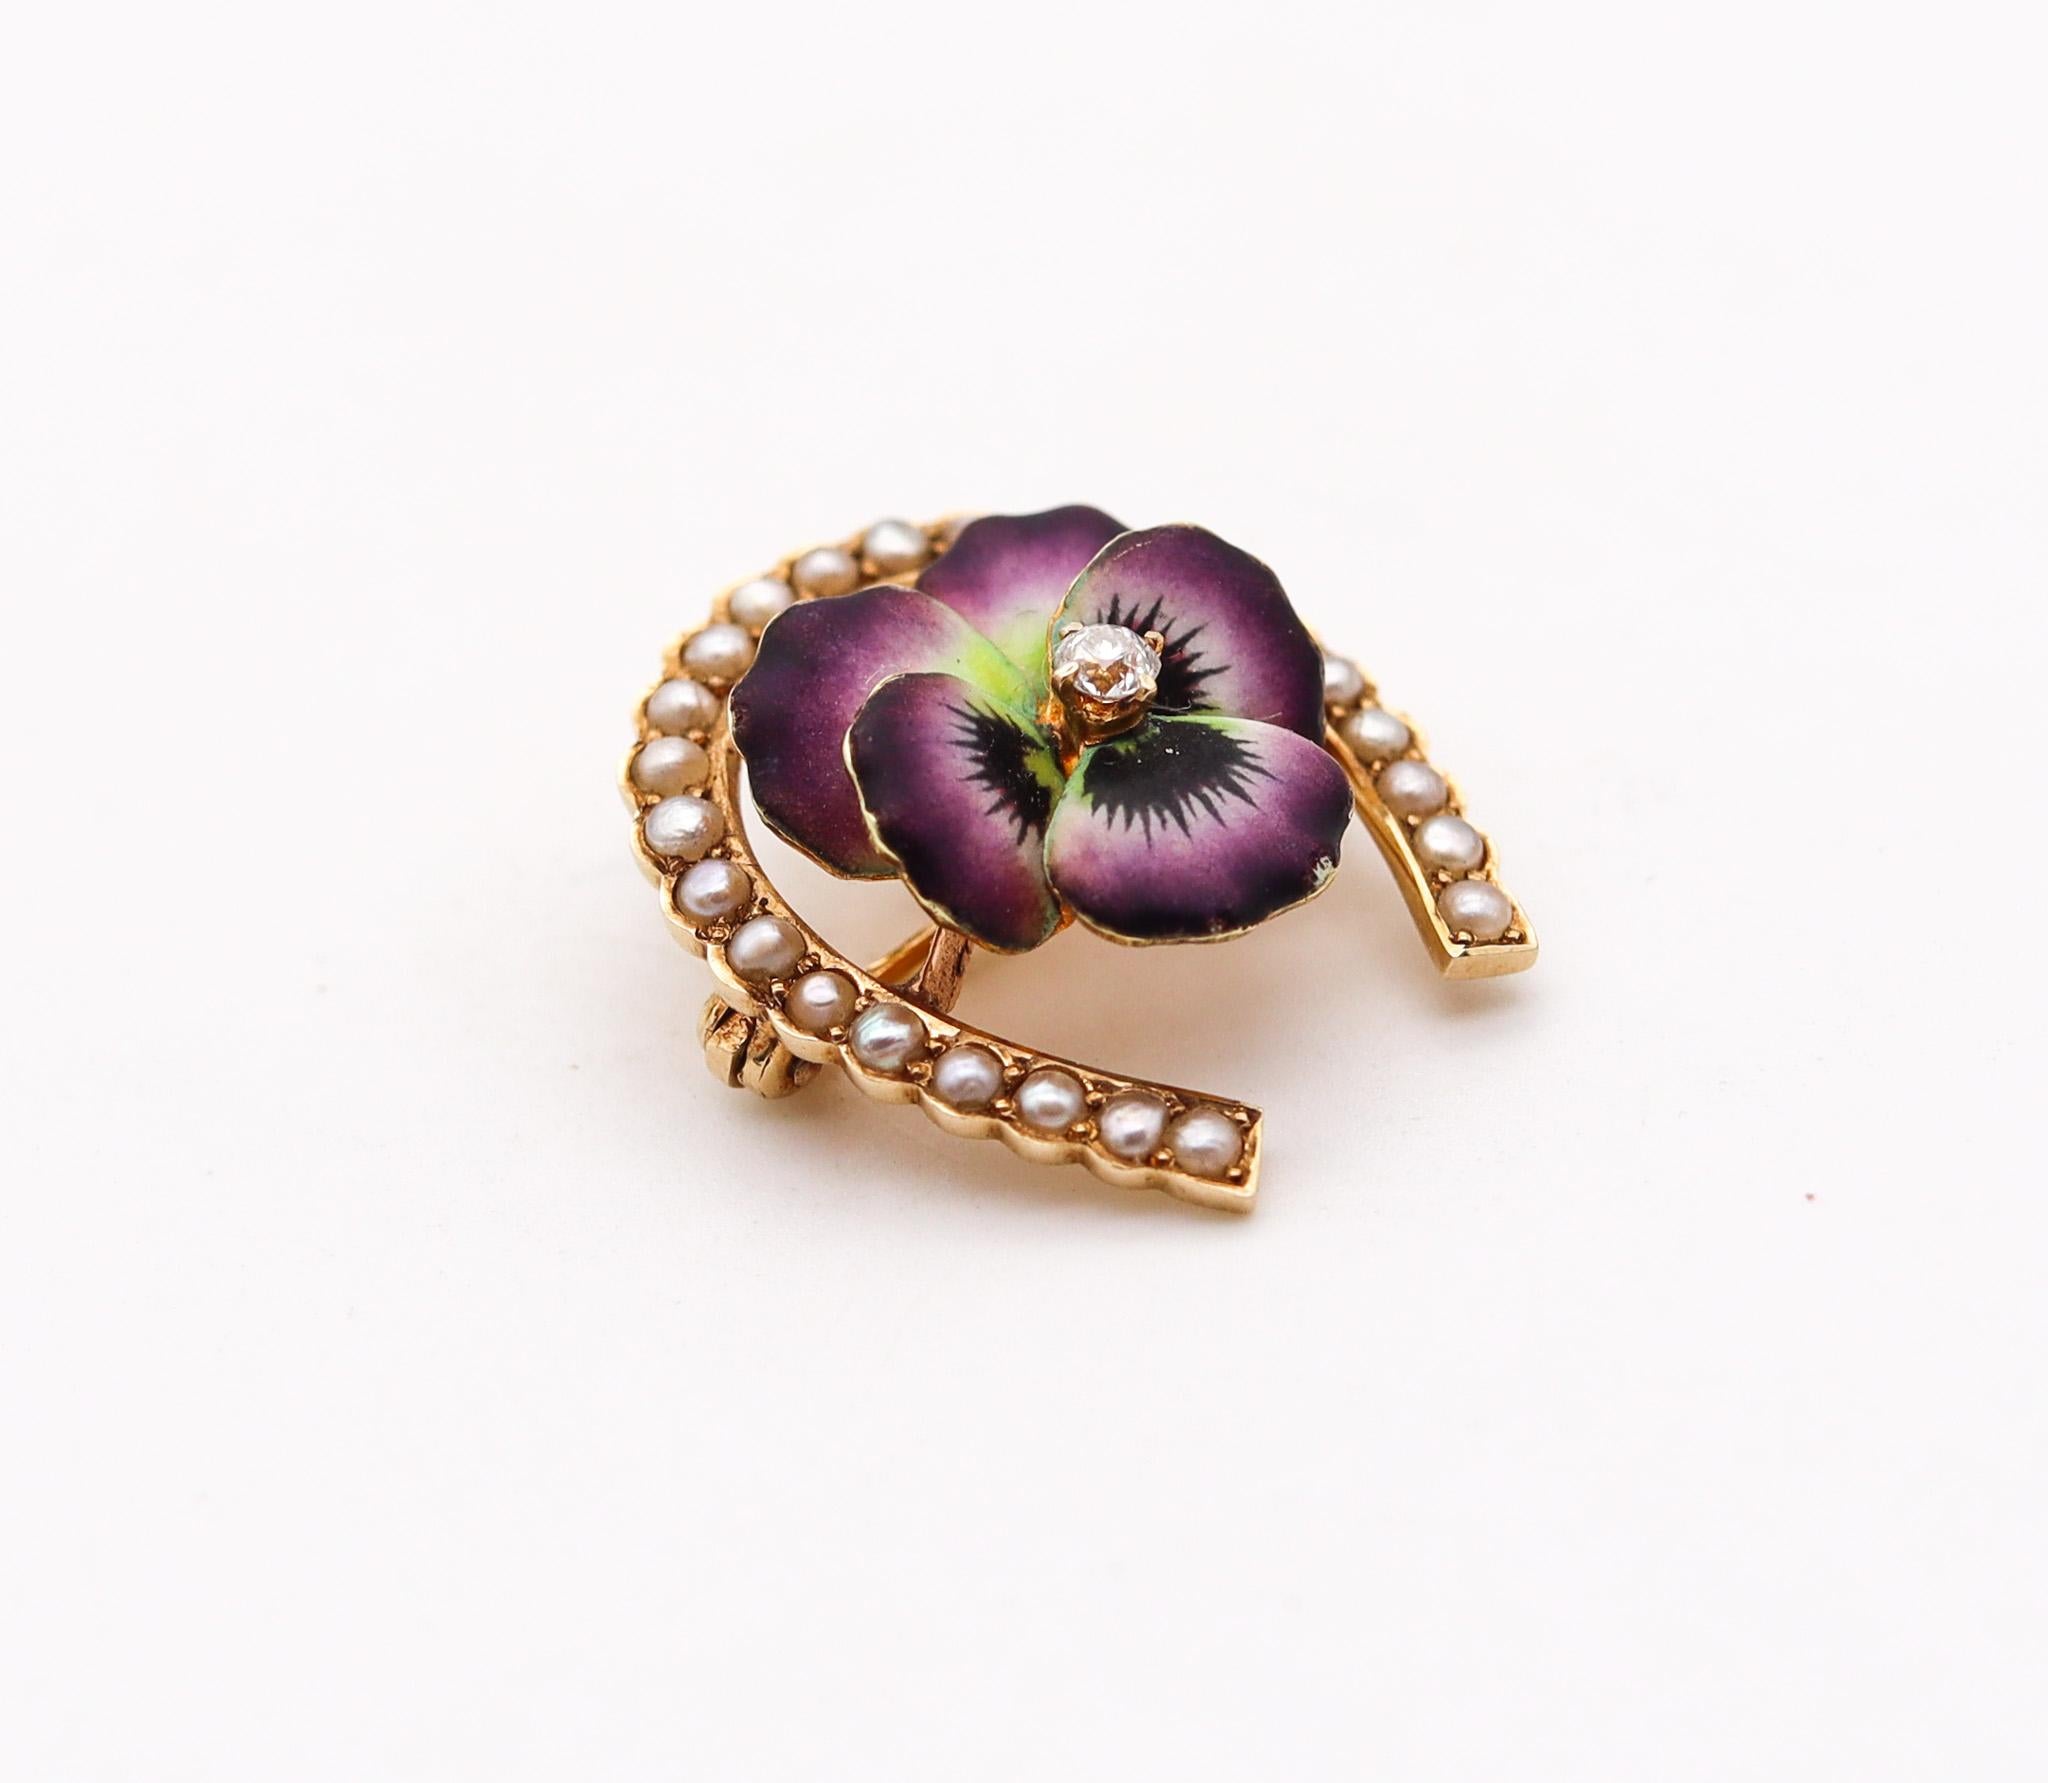 Edwardian enameled purple flower brooch.

Very beautiful three-dimensional piece, created in America during the Edwardian and the Art Nouveau periods, between the 1901 and1910. This beautiful pin brooch has been carefully crafted in the shape of a